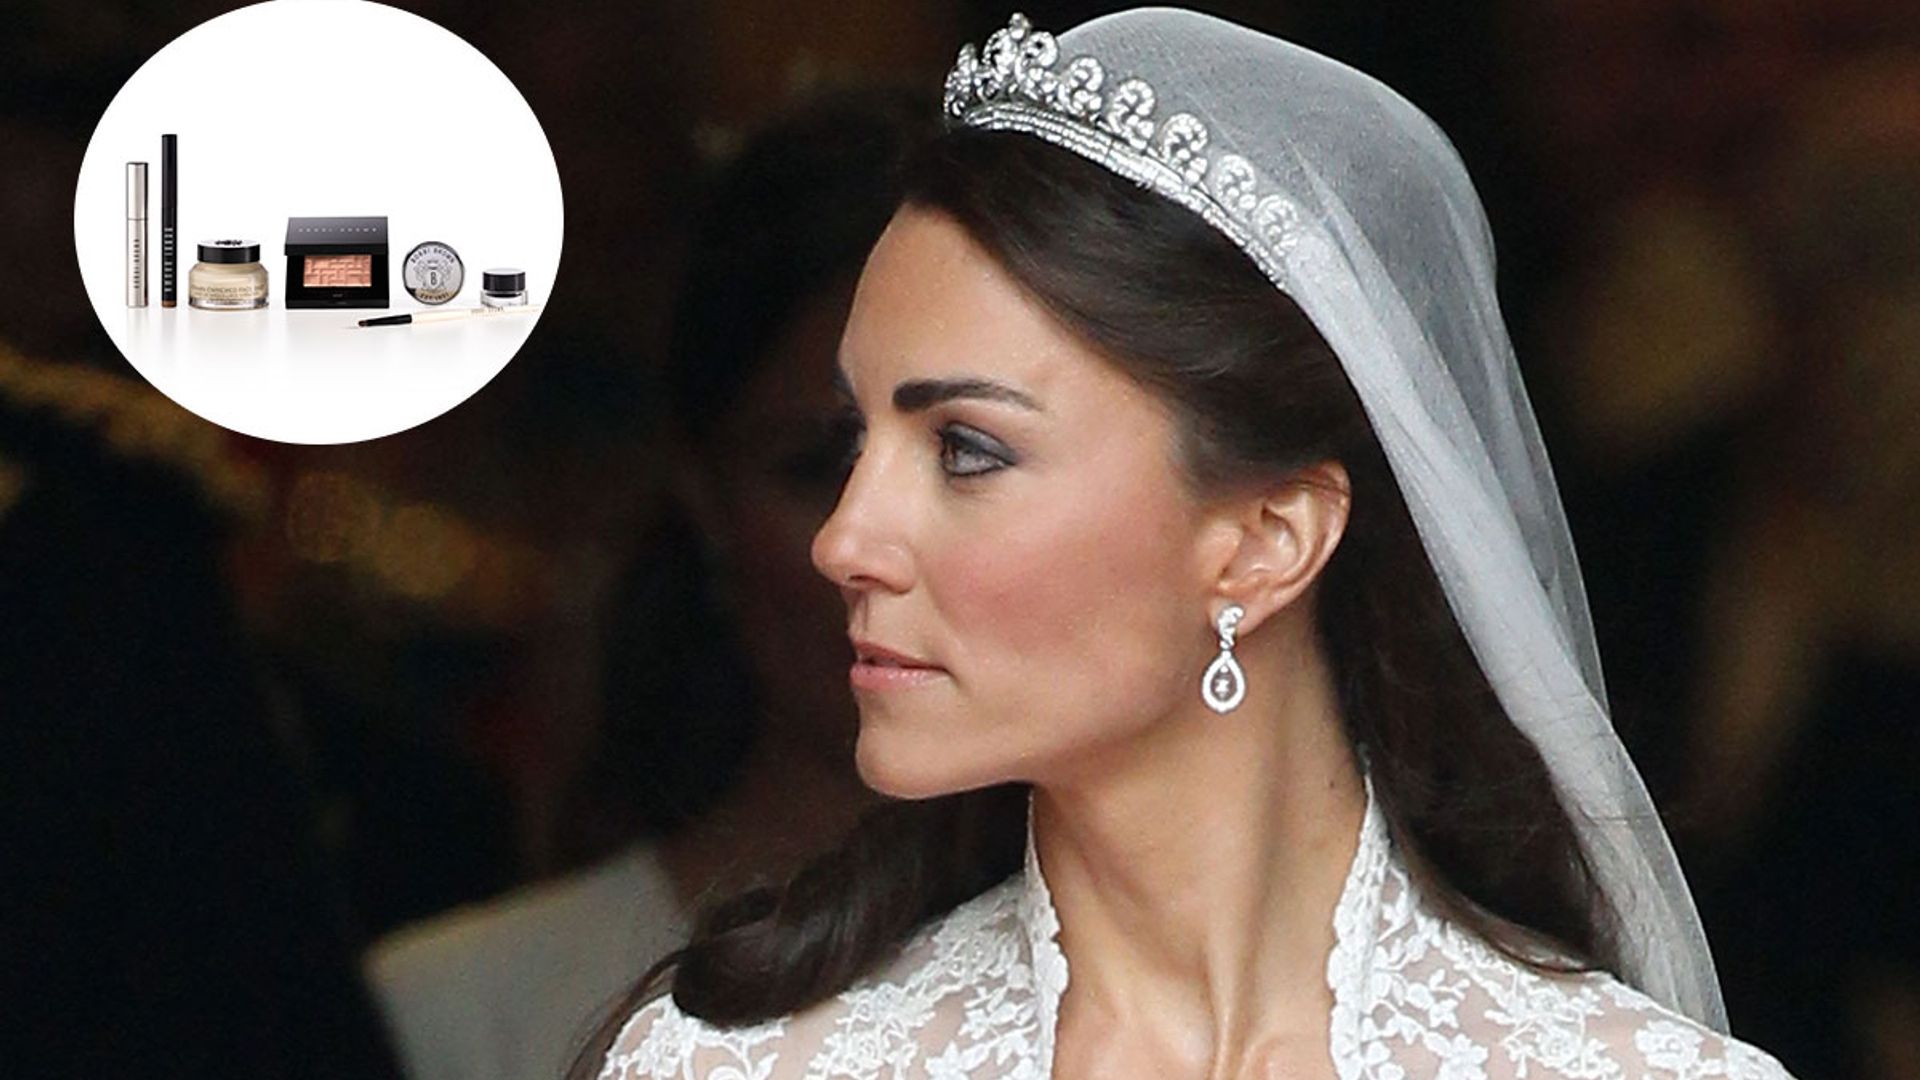 kate middleton's wedding makeup buys are now available in